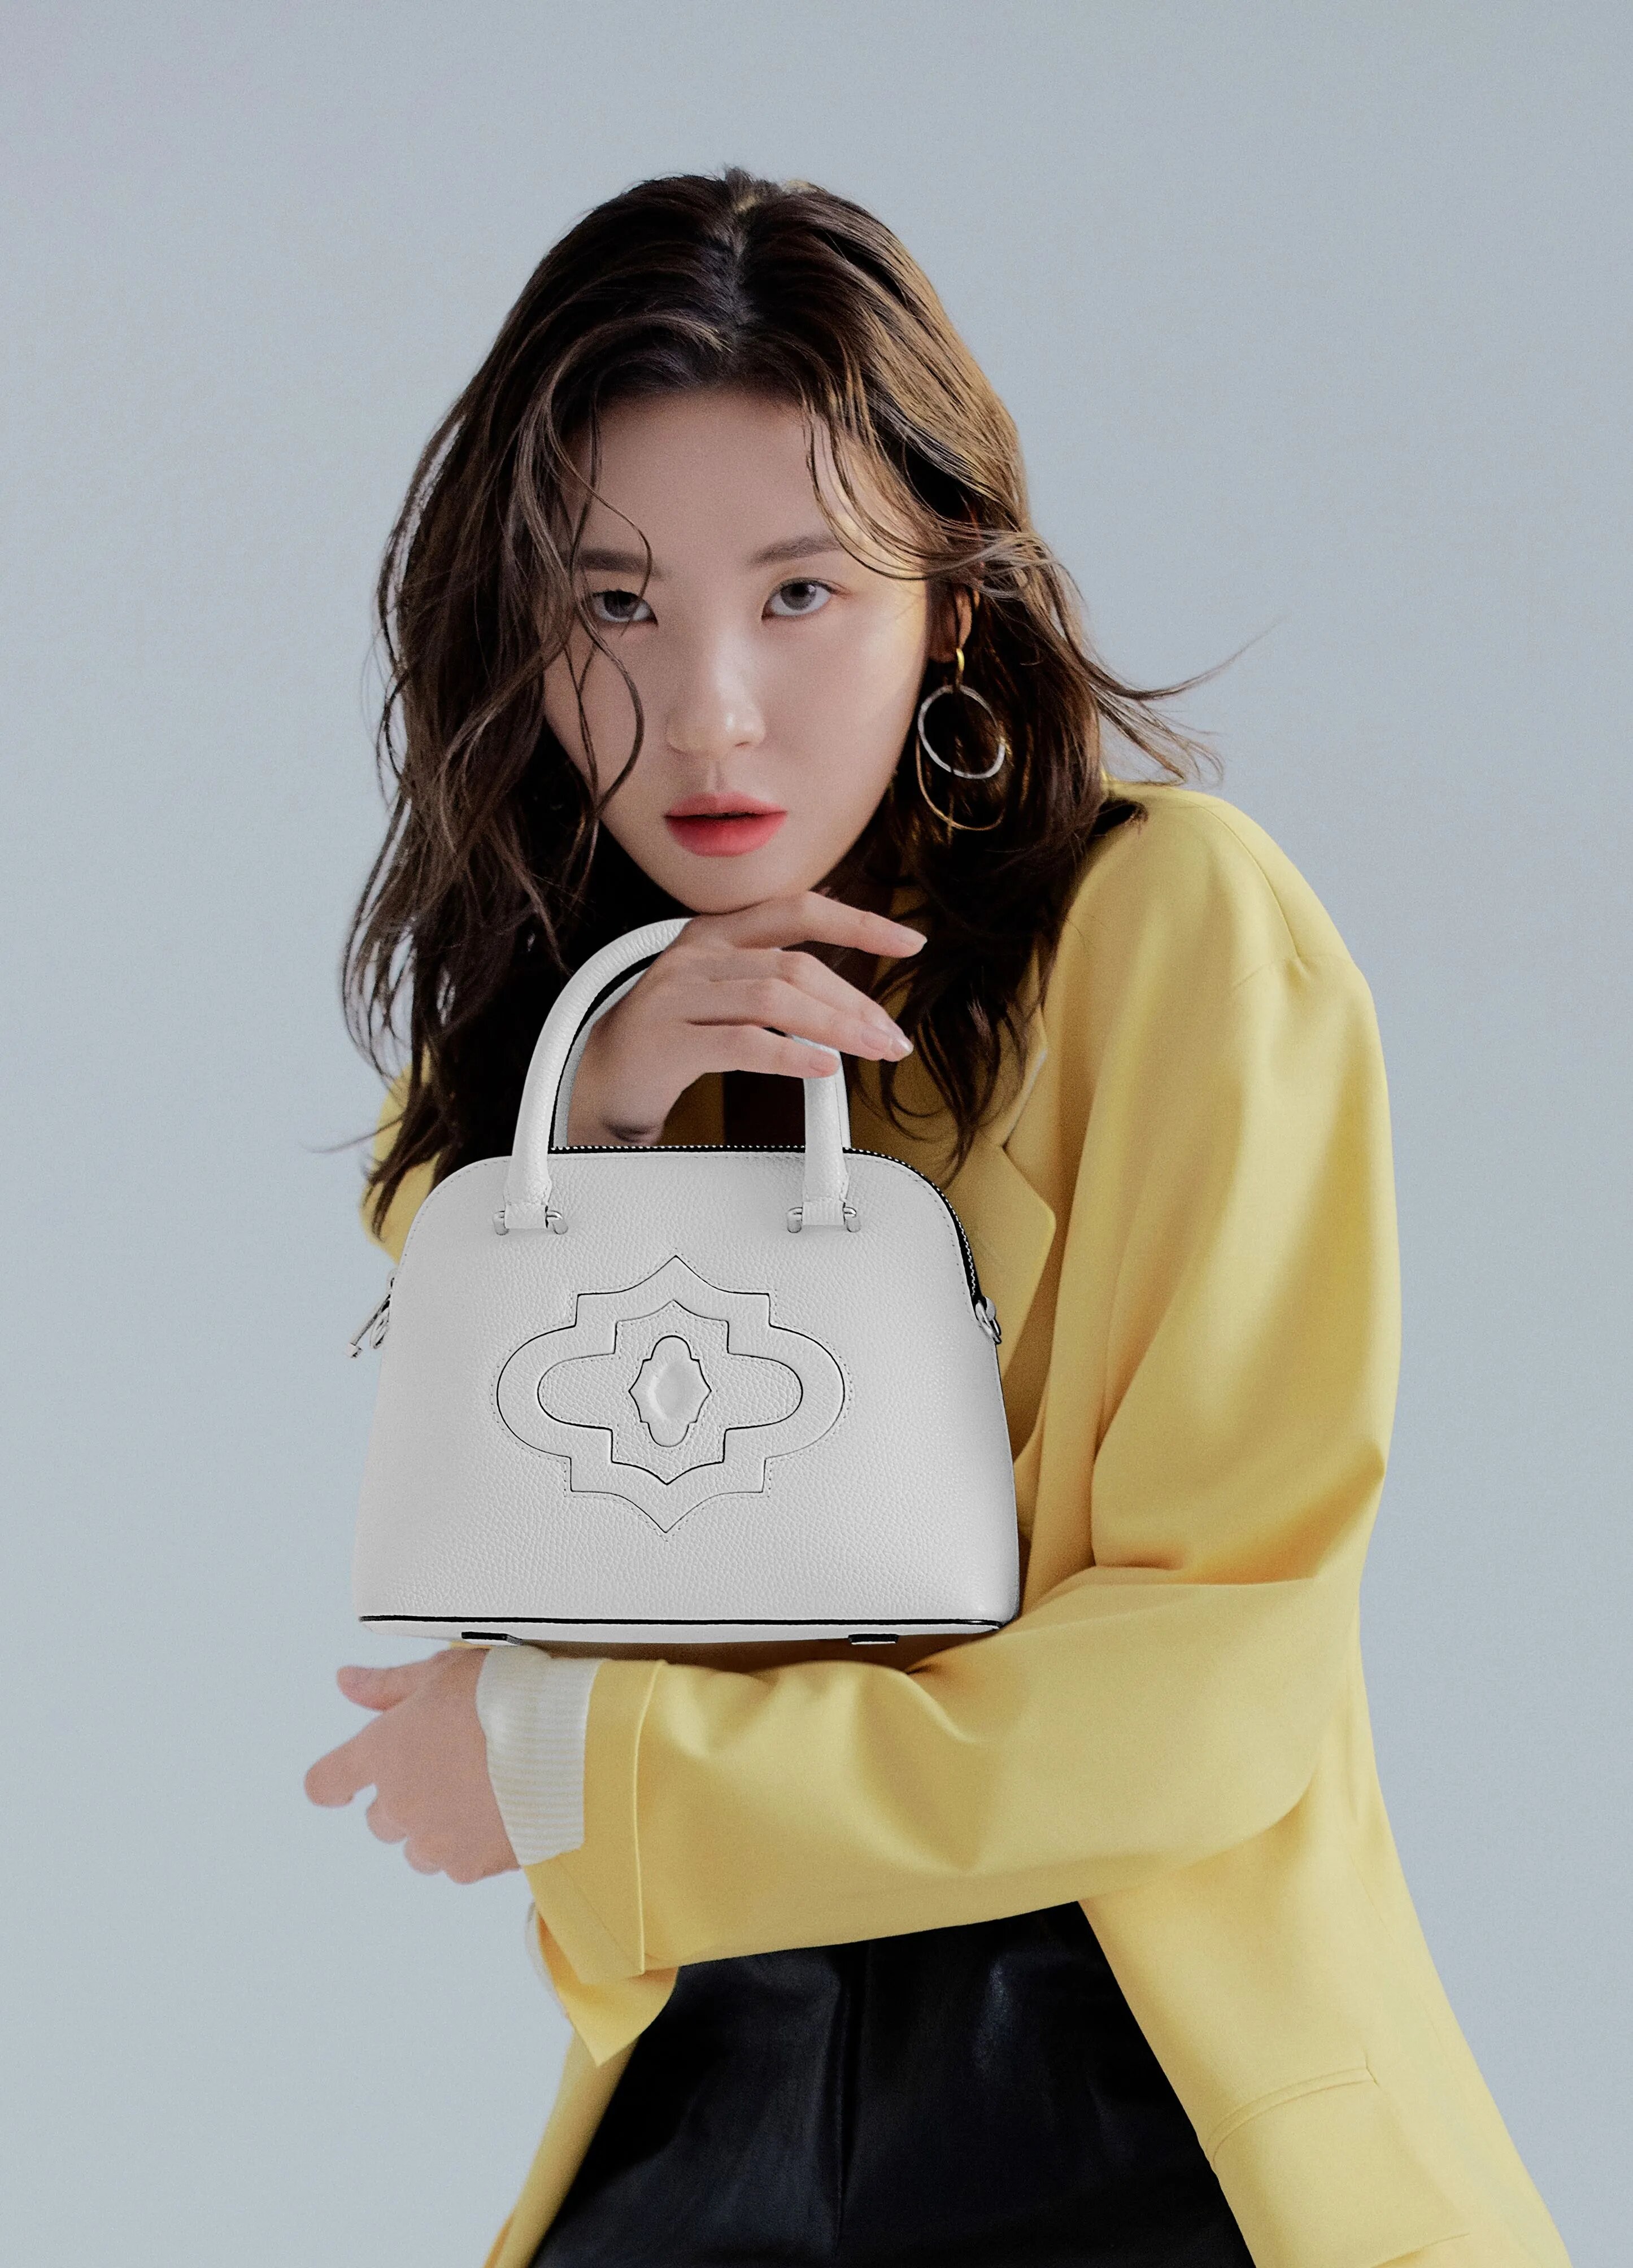 Sunmi for Oyani 2020 SS 'New Attitiude' Collection | kpopping